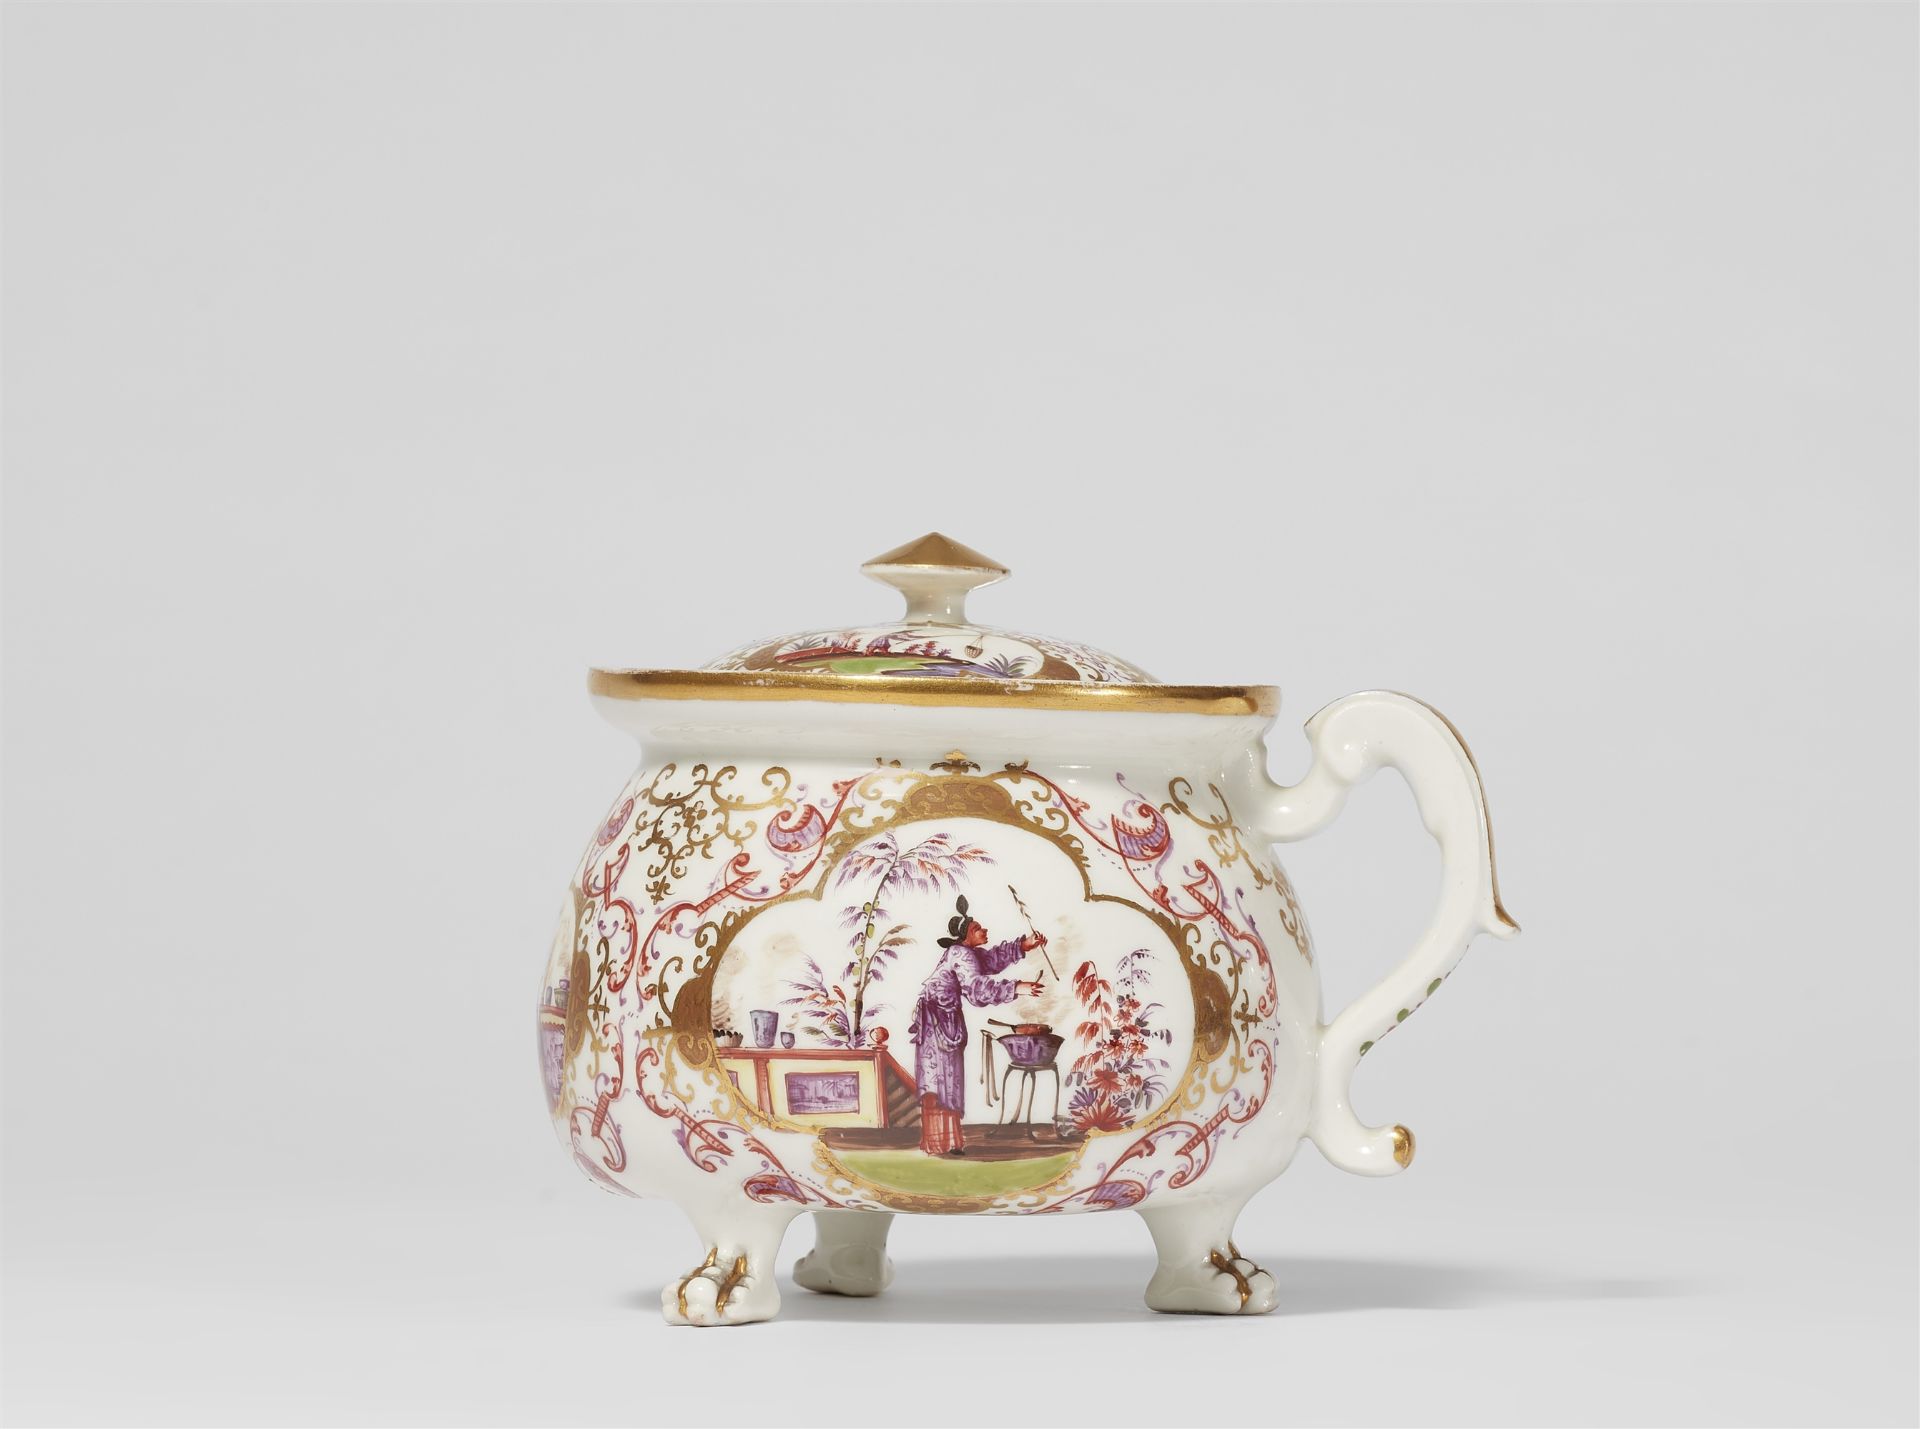 An early Meissen porcelain cream pot with Chinoiseries